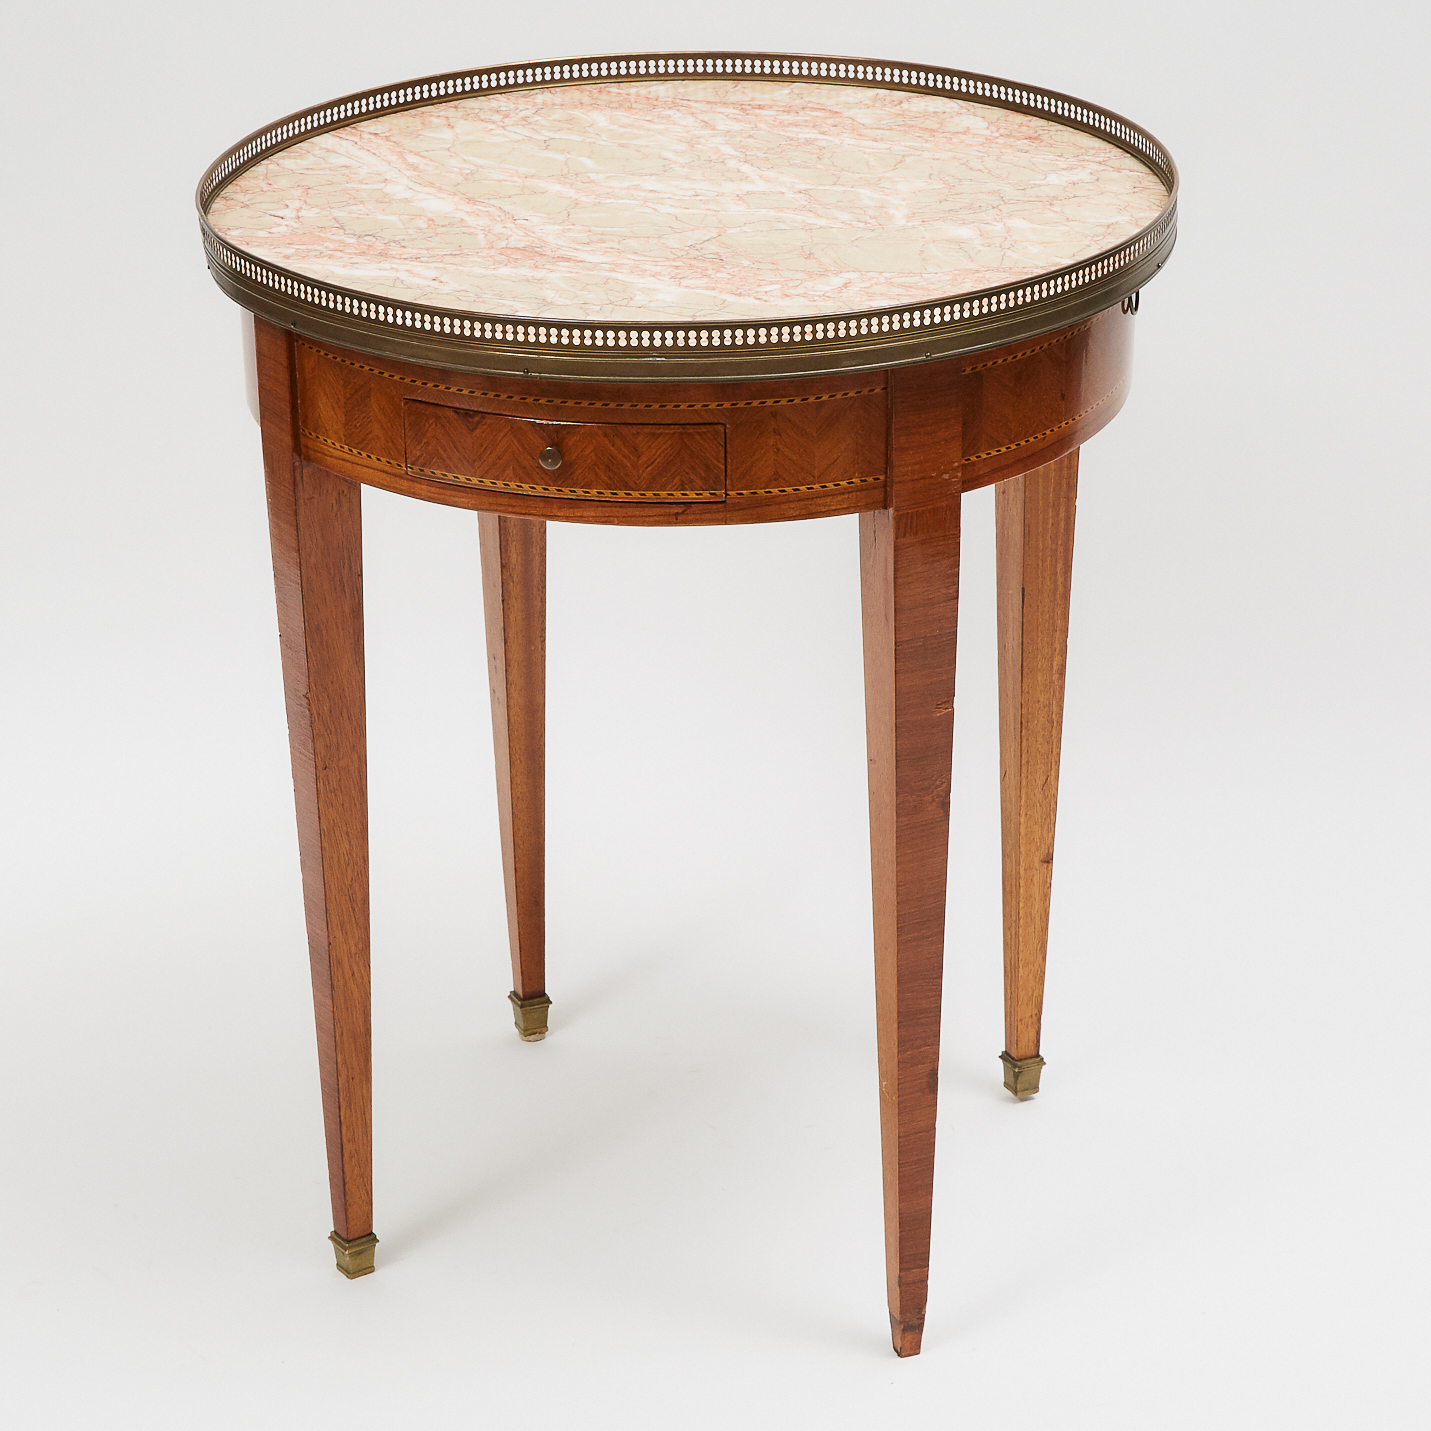 French Kingwood Parquetry Lamp Table, 19th/early 20th century